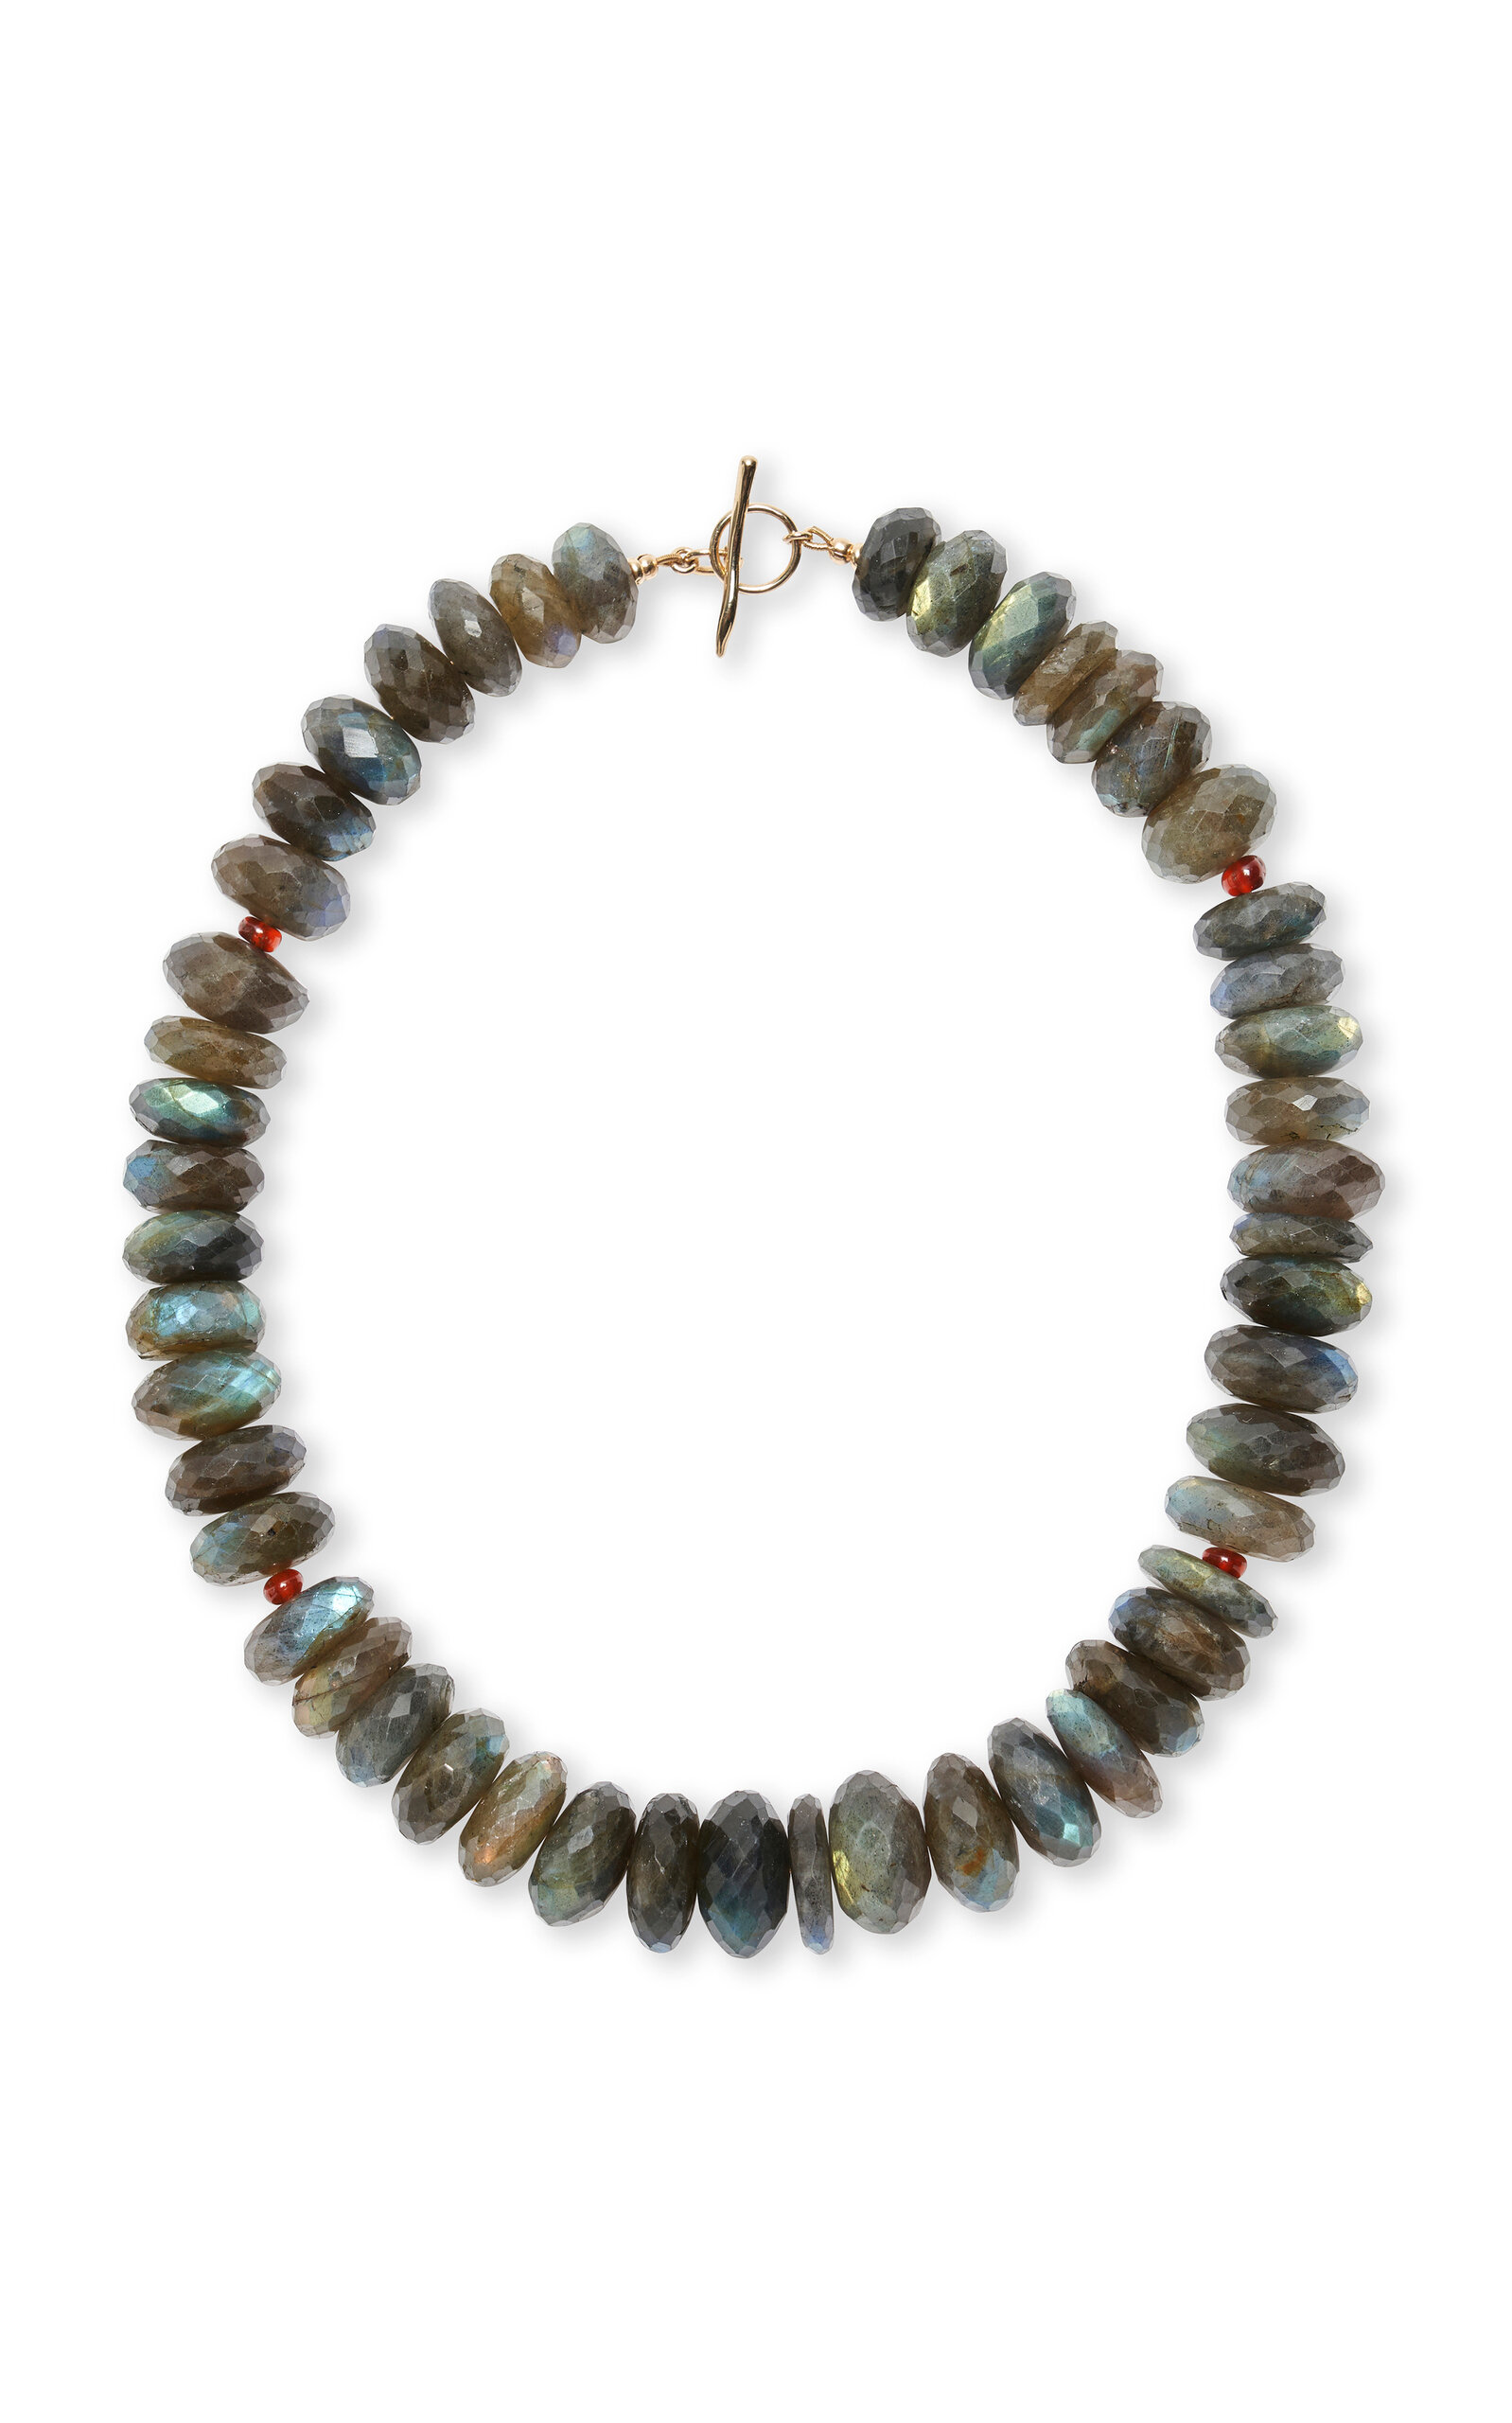 Exclusive Extra Large Labradorite and Garnet 14k Gold Necklace